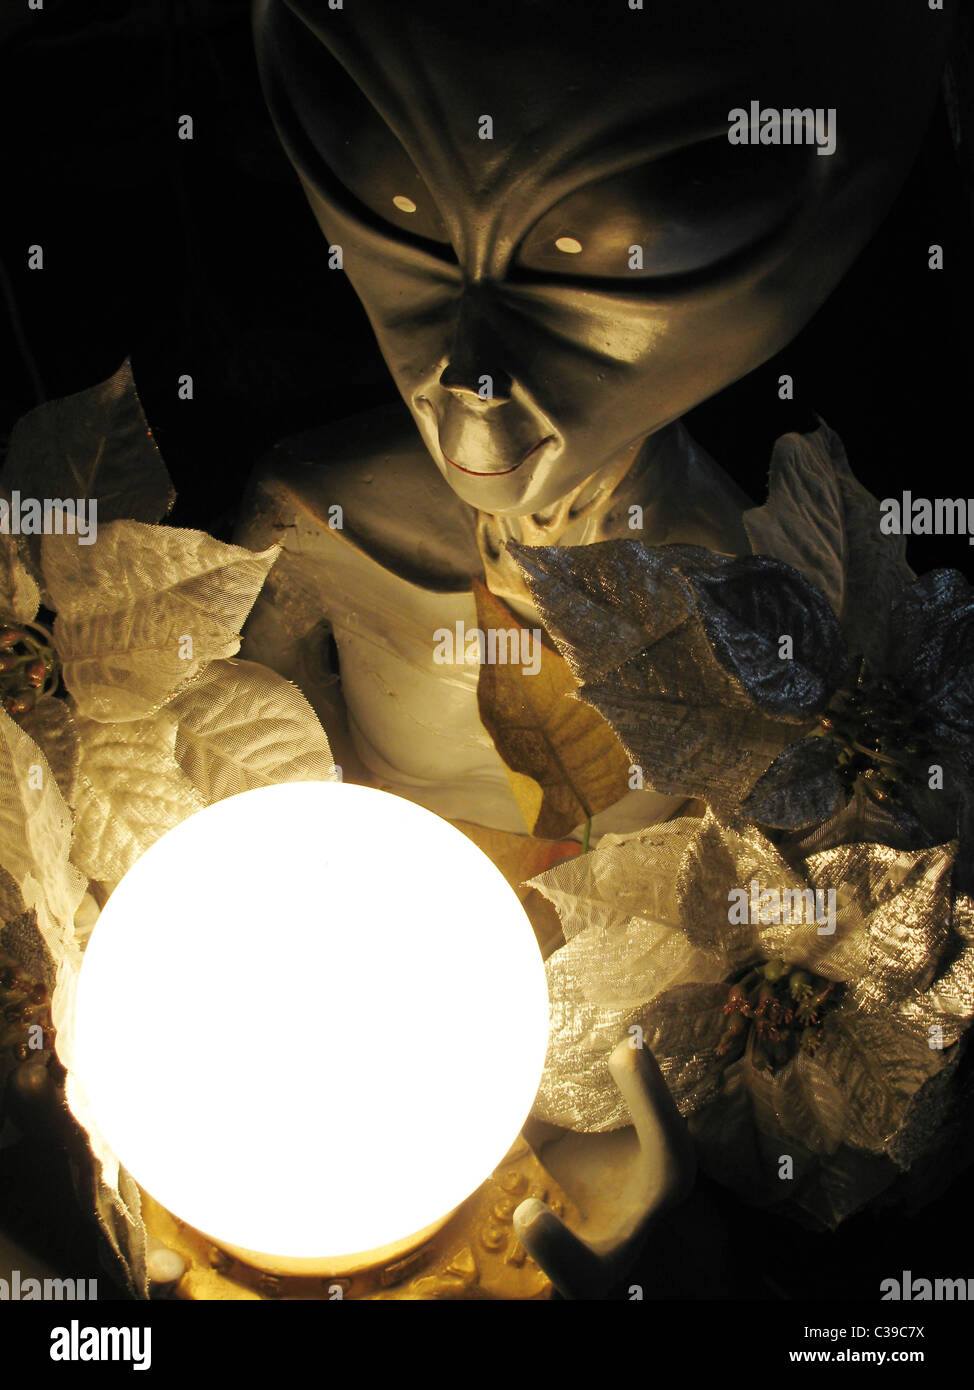 statuette of alien with ball in darkness Stock Photo